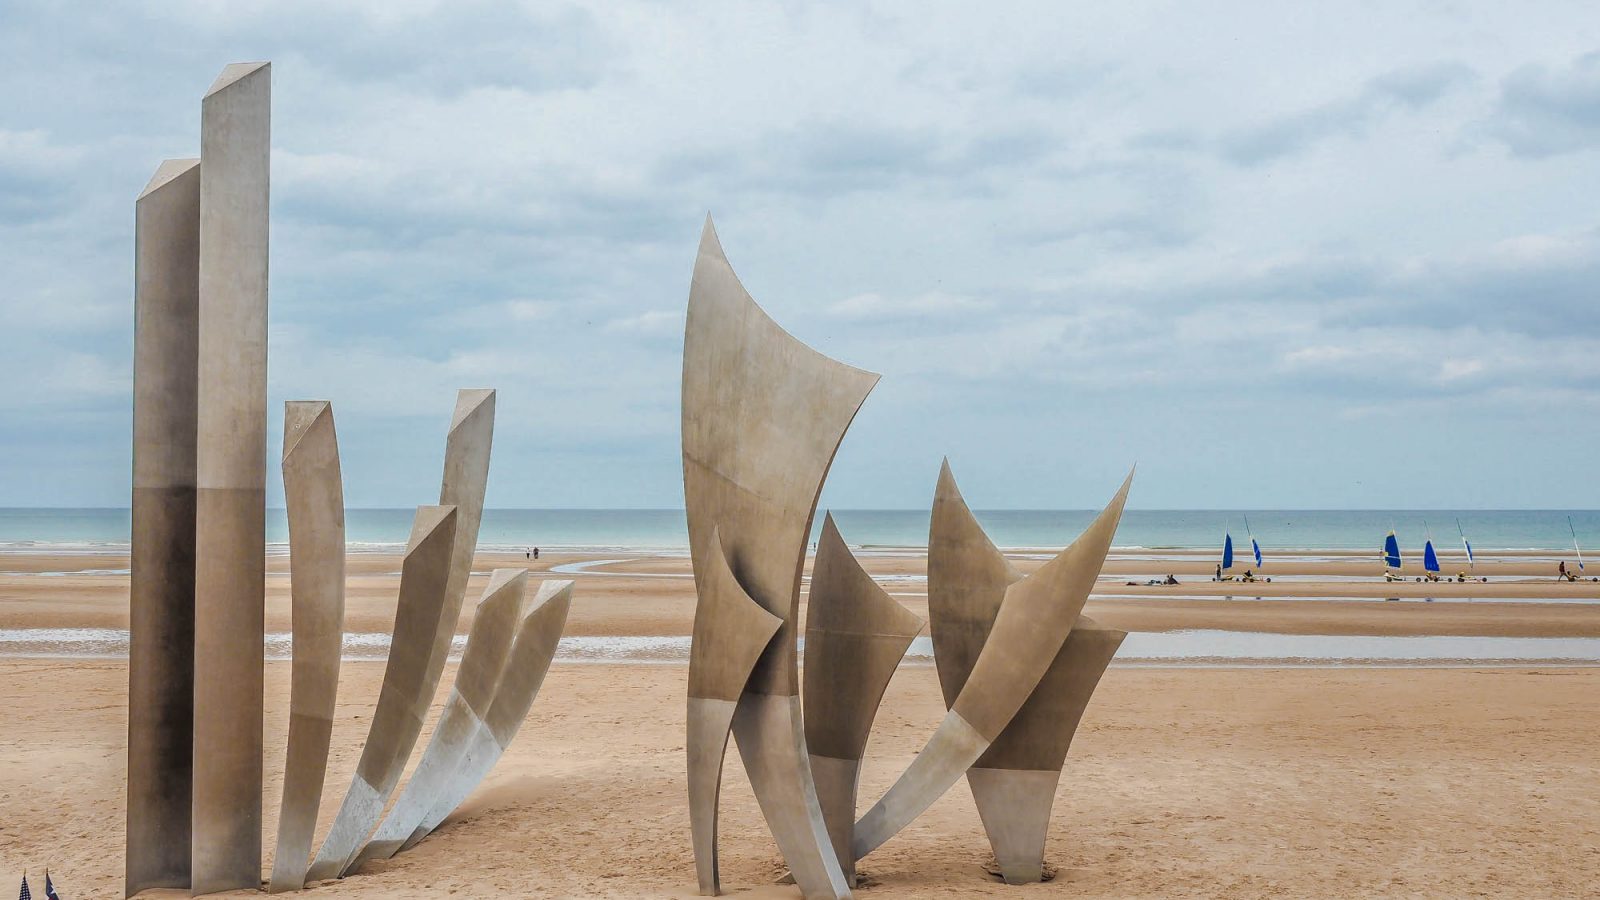 What to see at Omaha Beach, Normandy / Museums, memorials, monuments, and more / things to do at Omaha beach / D-Day and World War II sites in Normandy / #destinationwwii #worldwarii #normandy #omahabeach #dday